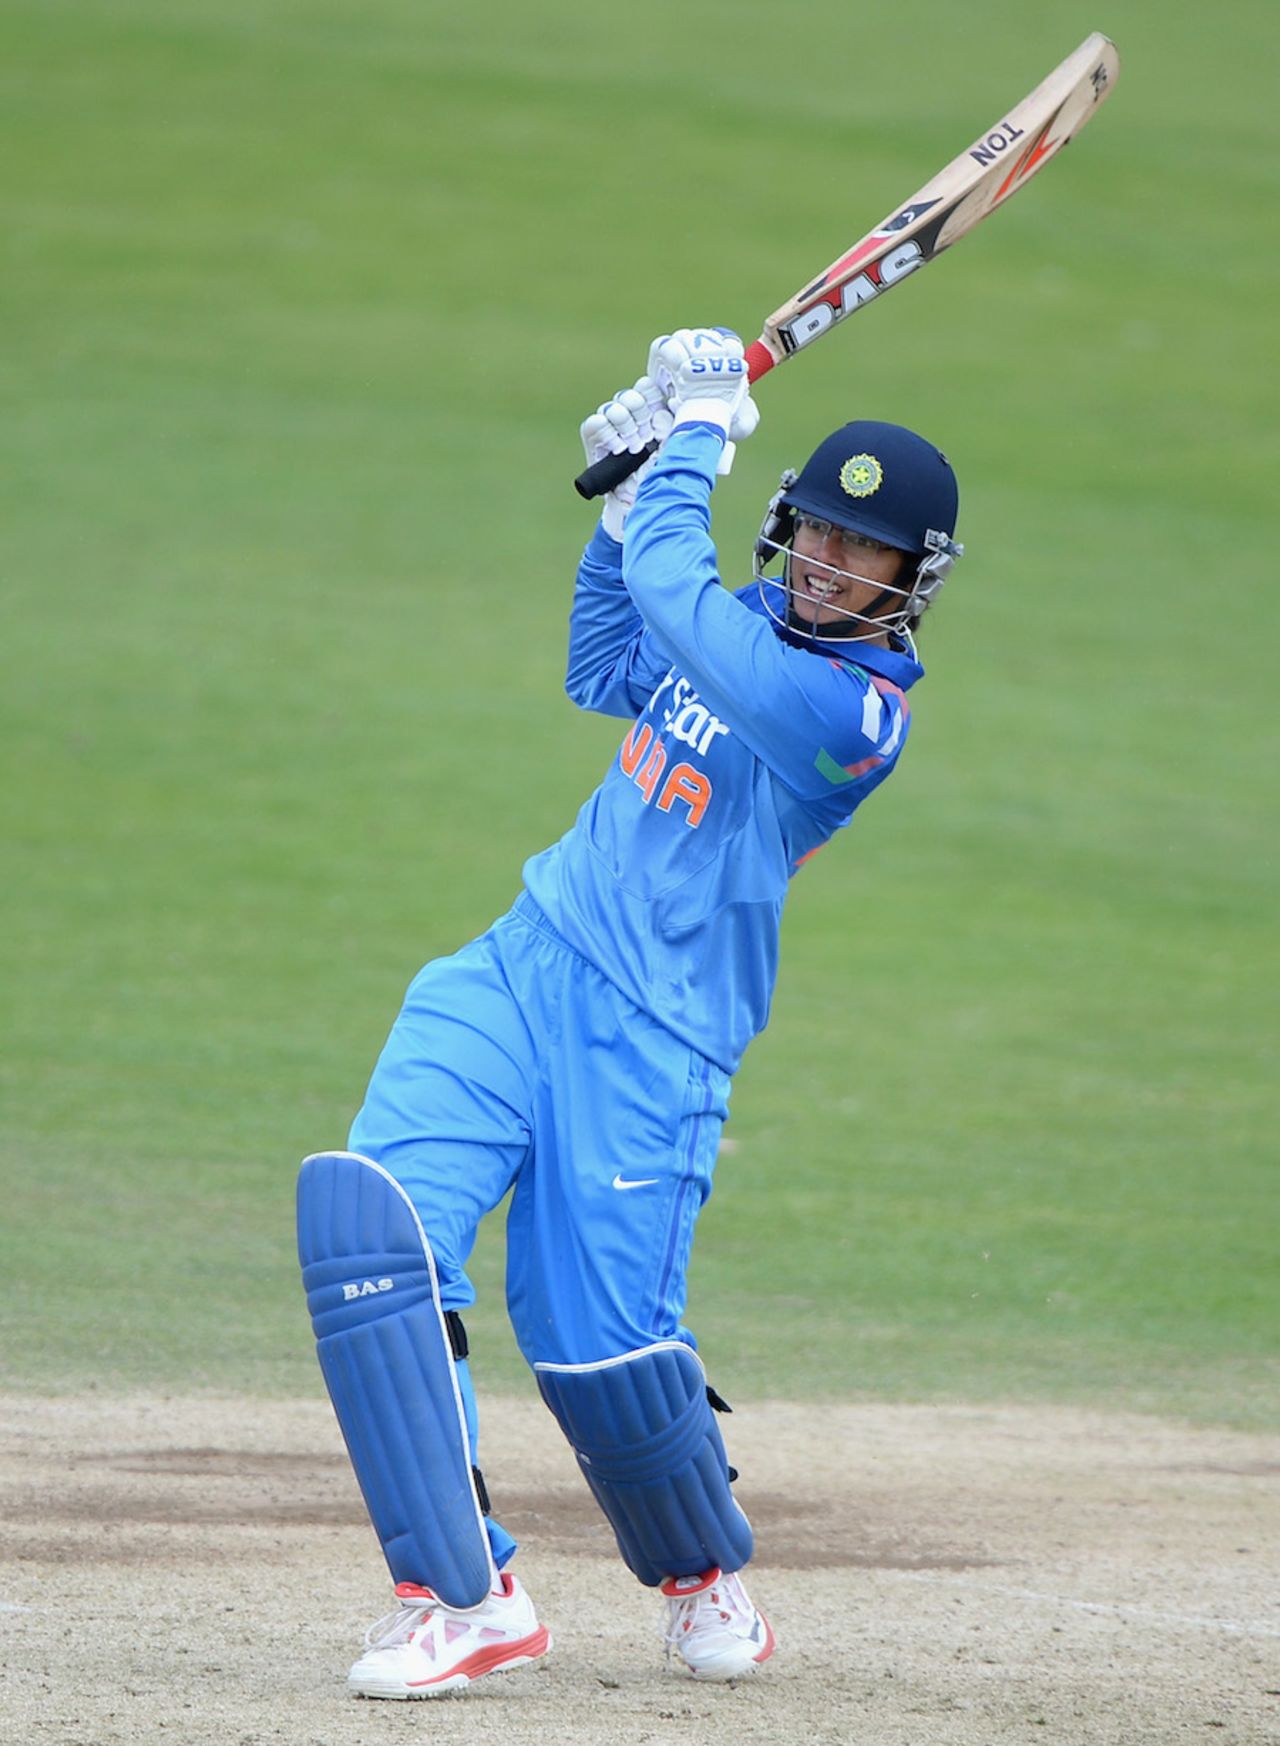 Smriti Mandhana led the charge at the top of the order, England v India, 2nd women's ODI, Scarborough, August 23, 2014